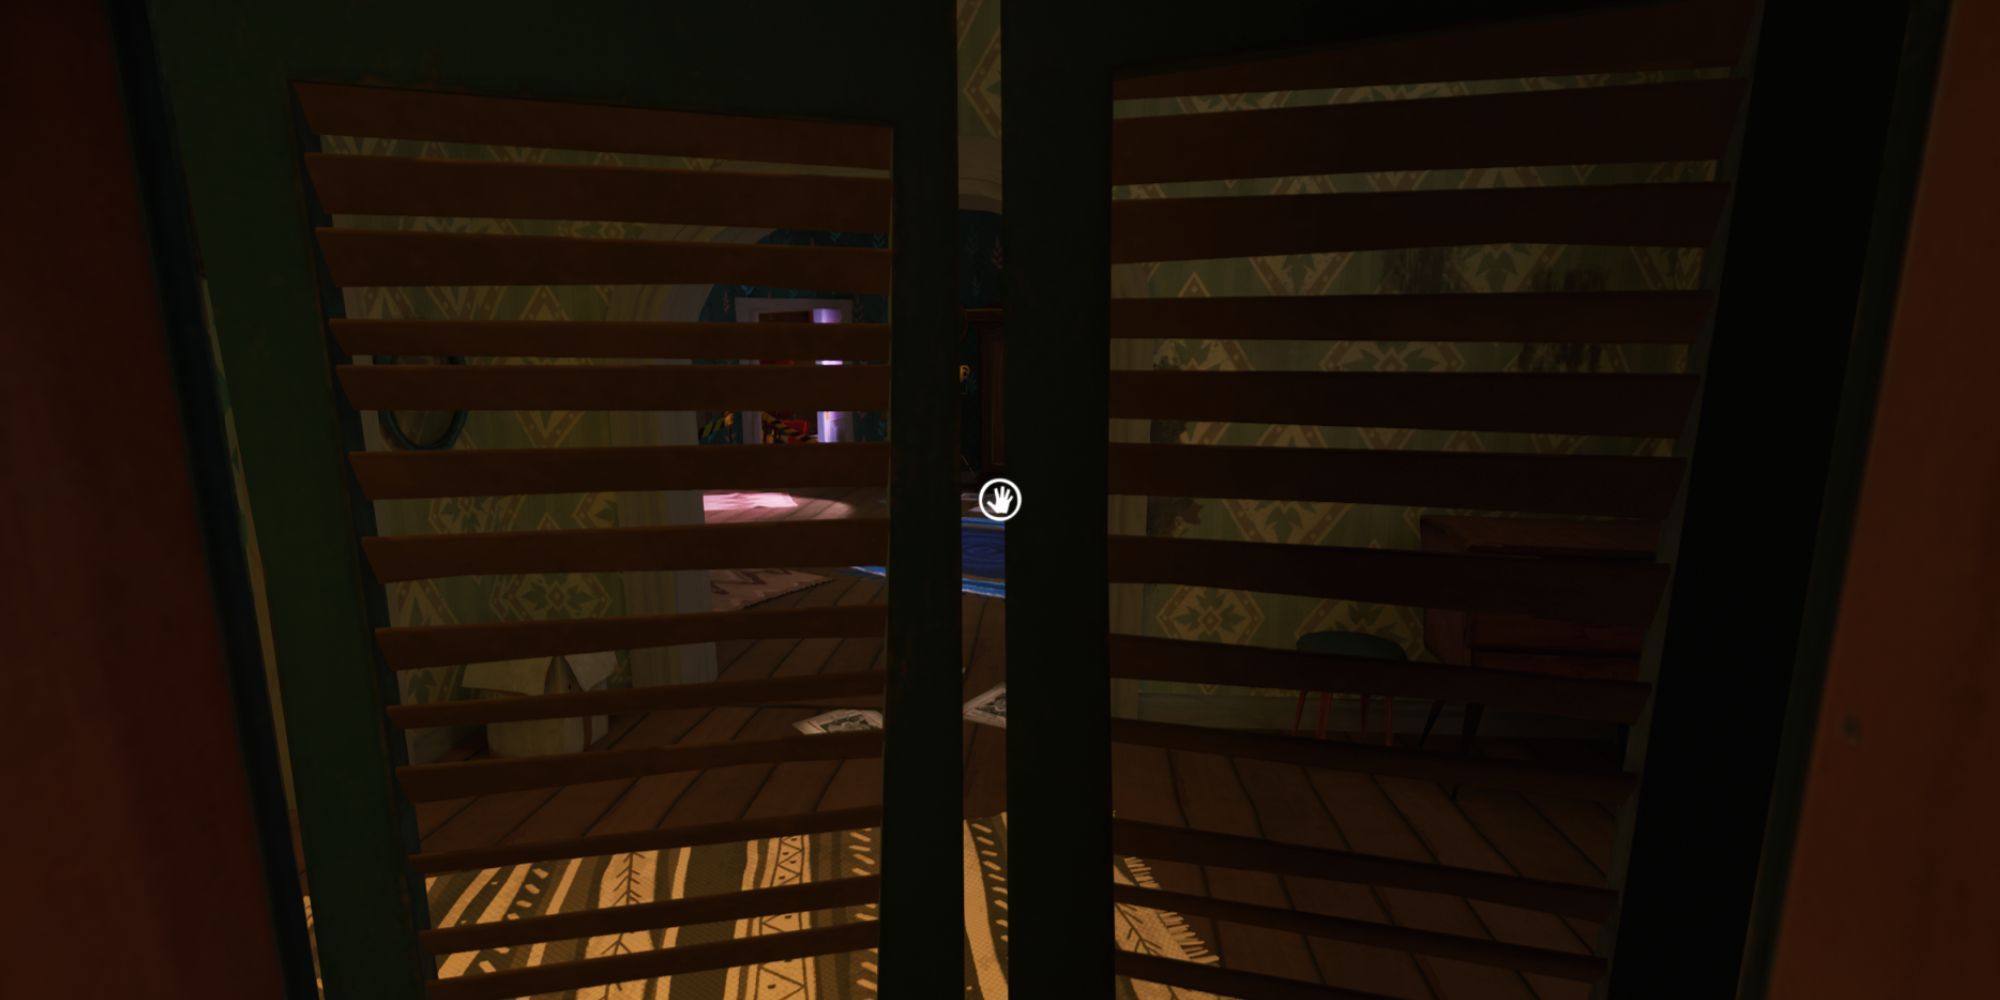 Hiding in a wooden cupboard after hearing someone patrolling the house the player is in.